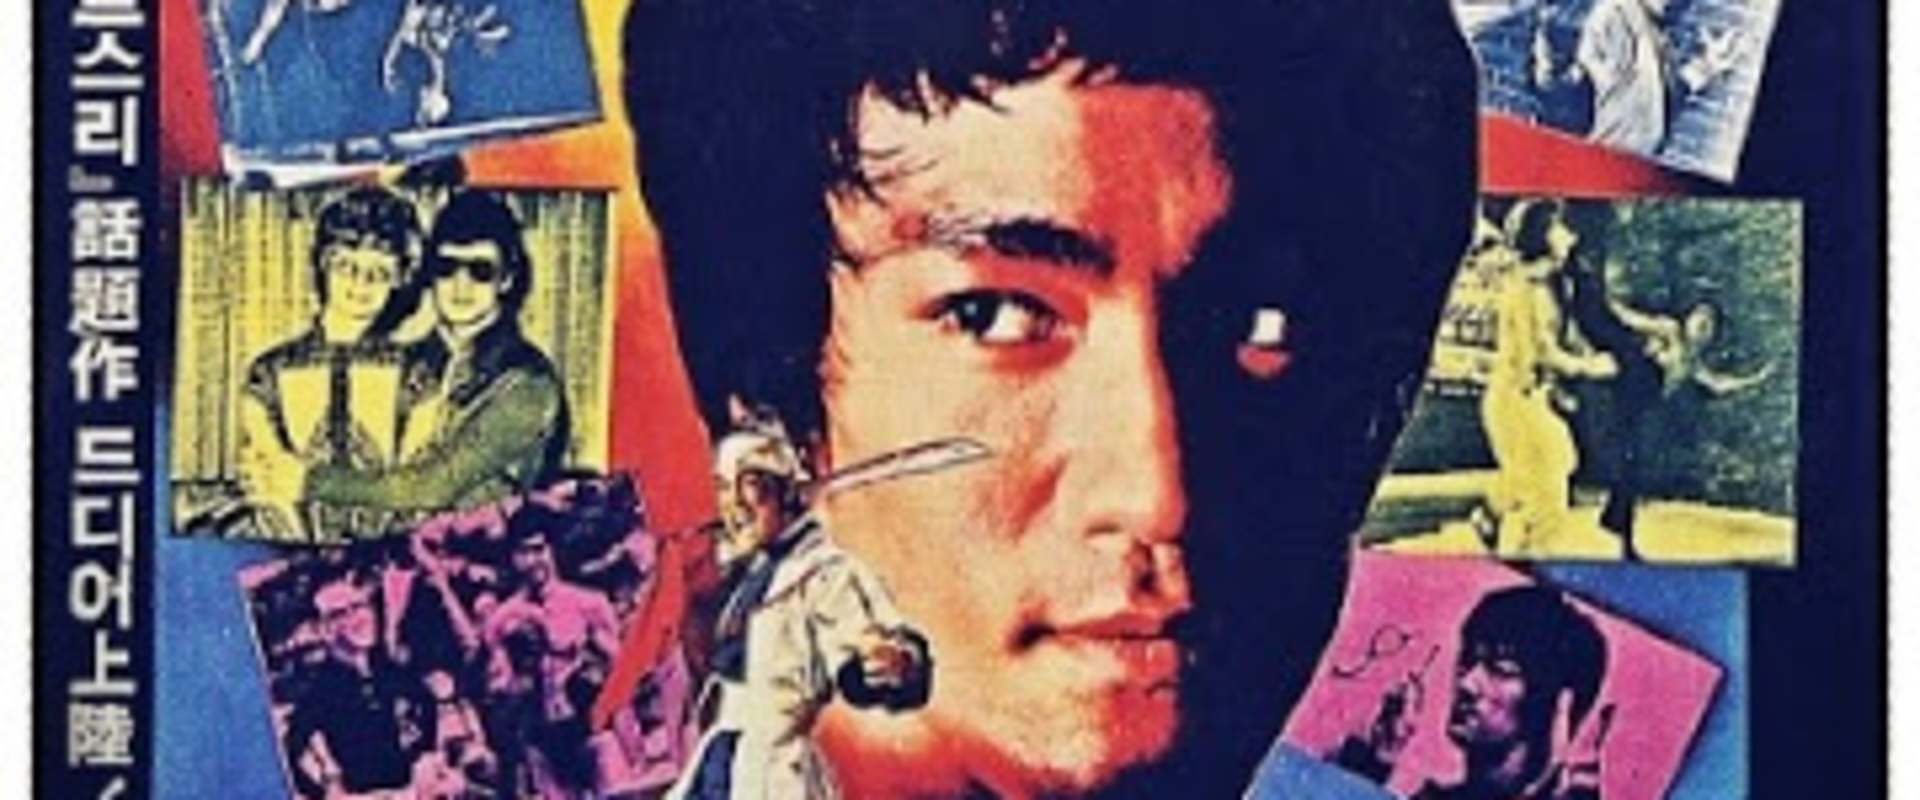 Bruce Lee: The Man and the Legend background 2